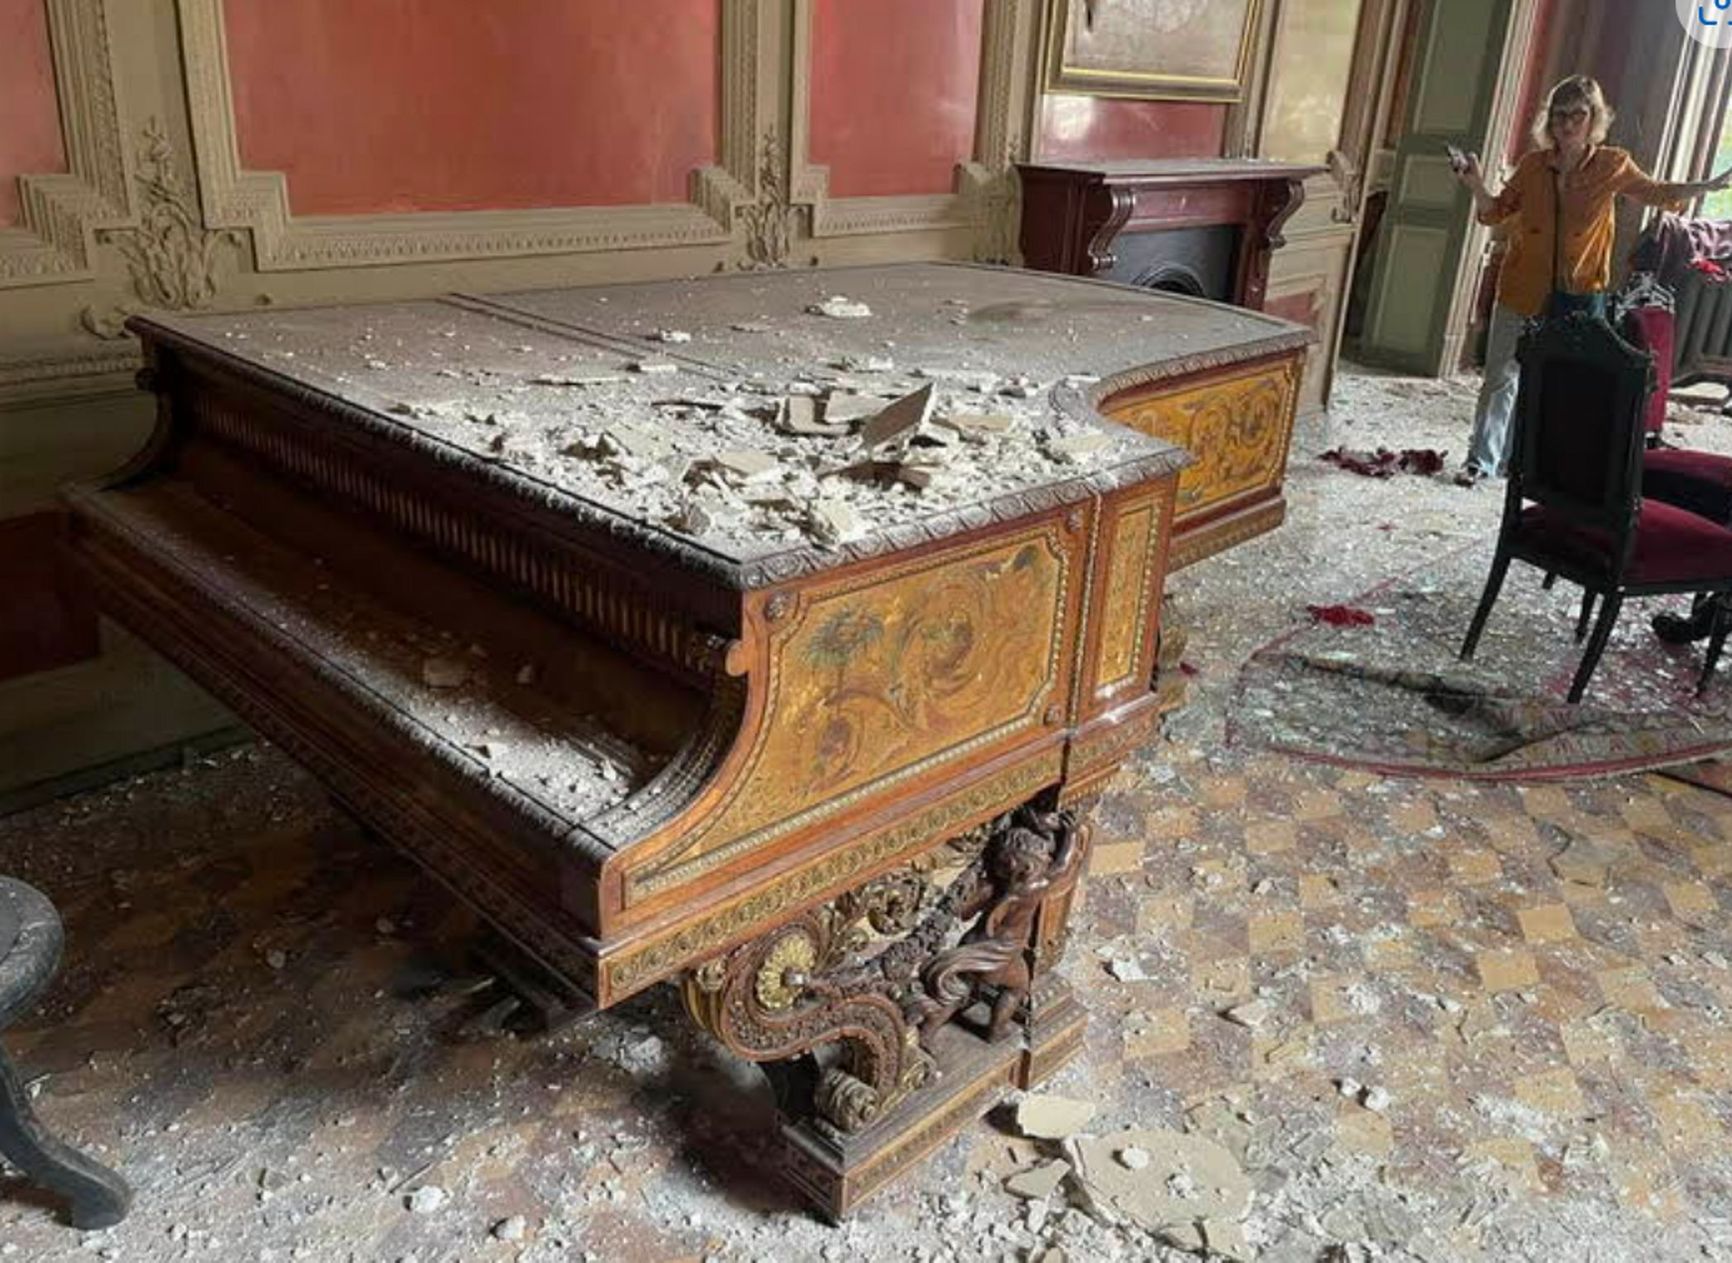 The antique grand piano that belonged to Franz Liszt